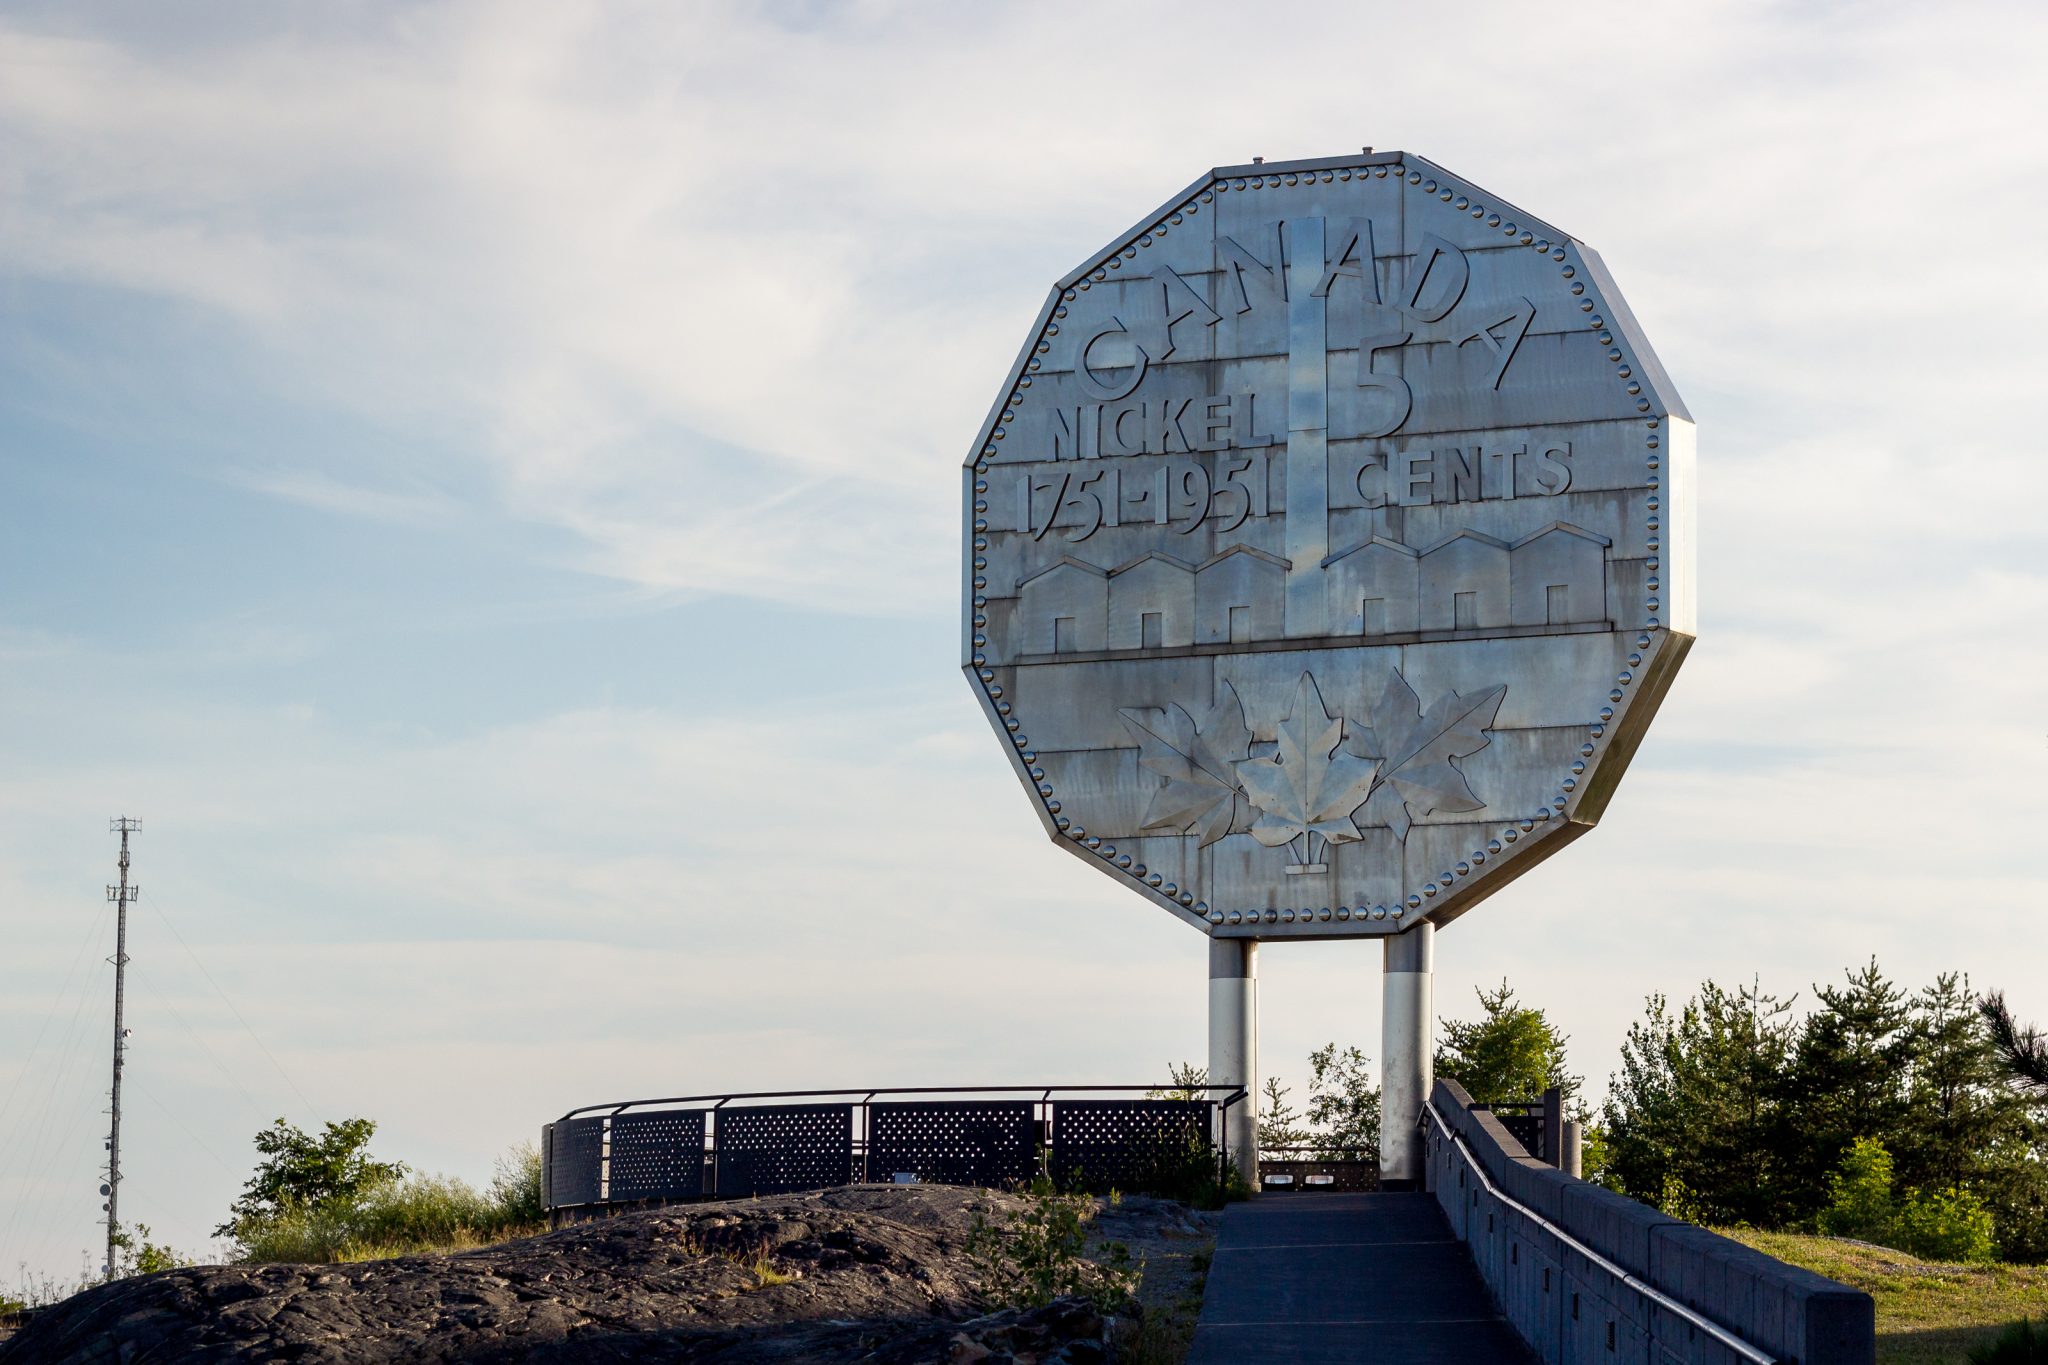 An image of The Big Nickel, a nine-metre (30 ft) replica of a 1951 Canadian nickel, located at the grounds of the Dynamic Earth science museum in Sudbury, Ontario.